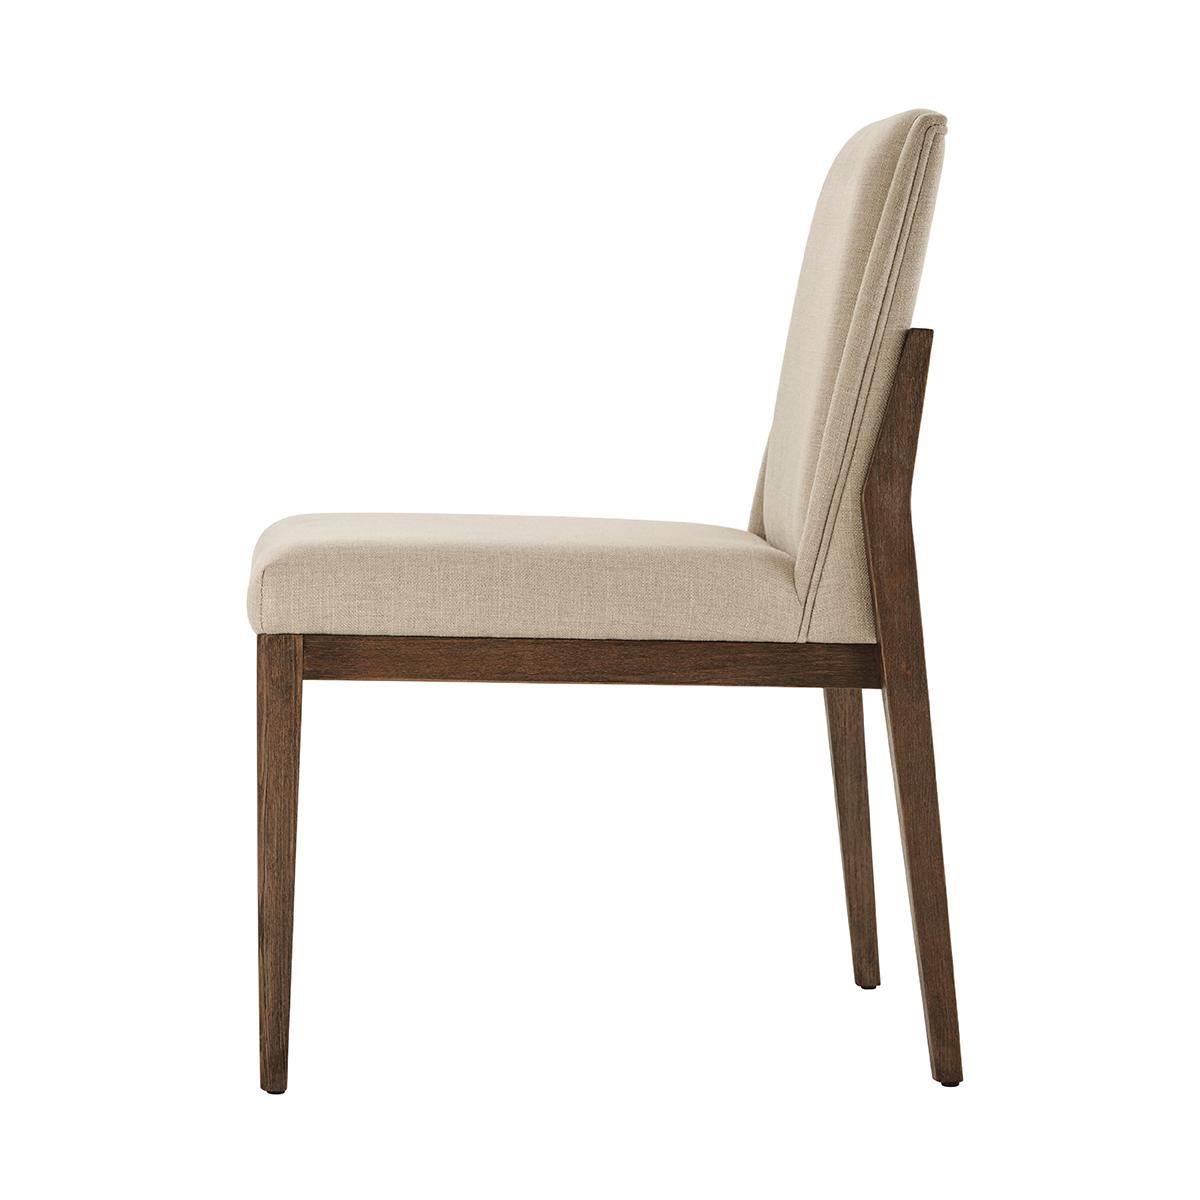 Vietnamese Modern Brushed Beech Dining Chair For Sale